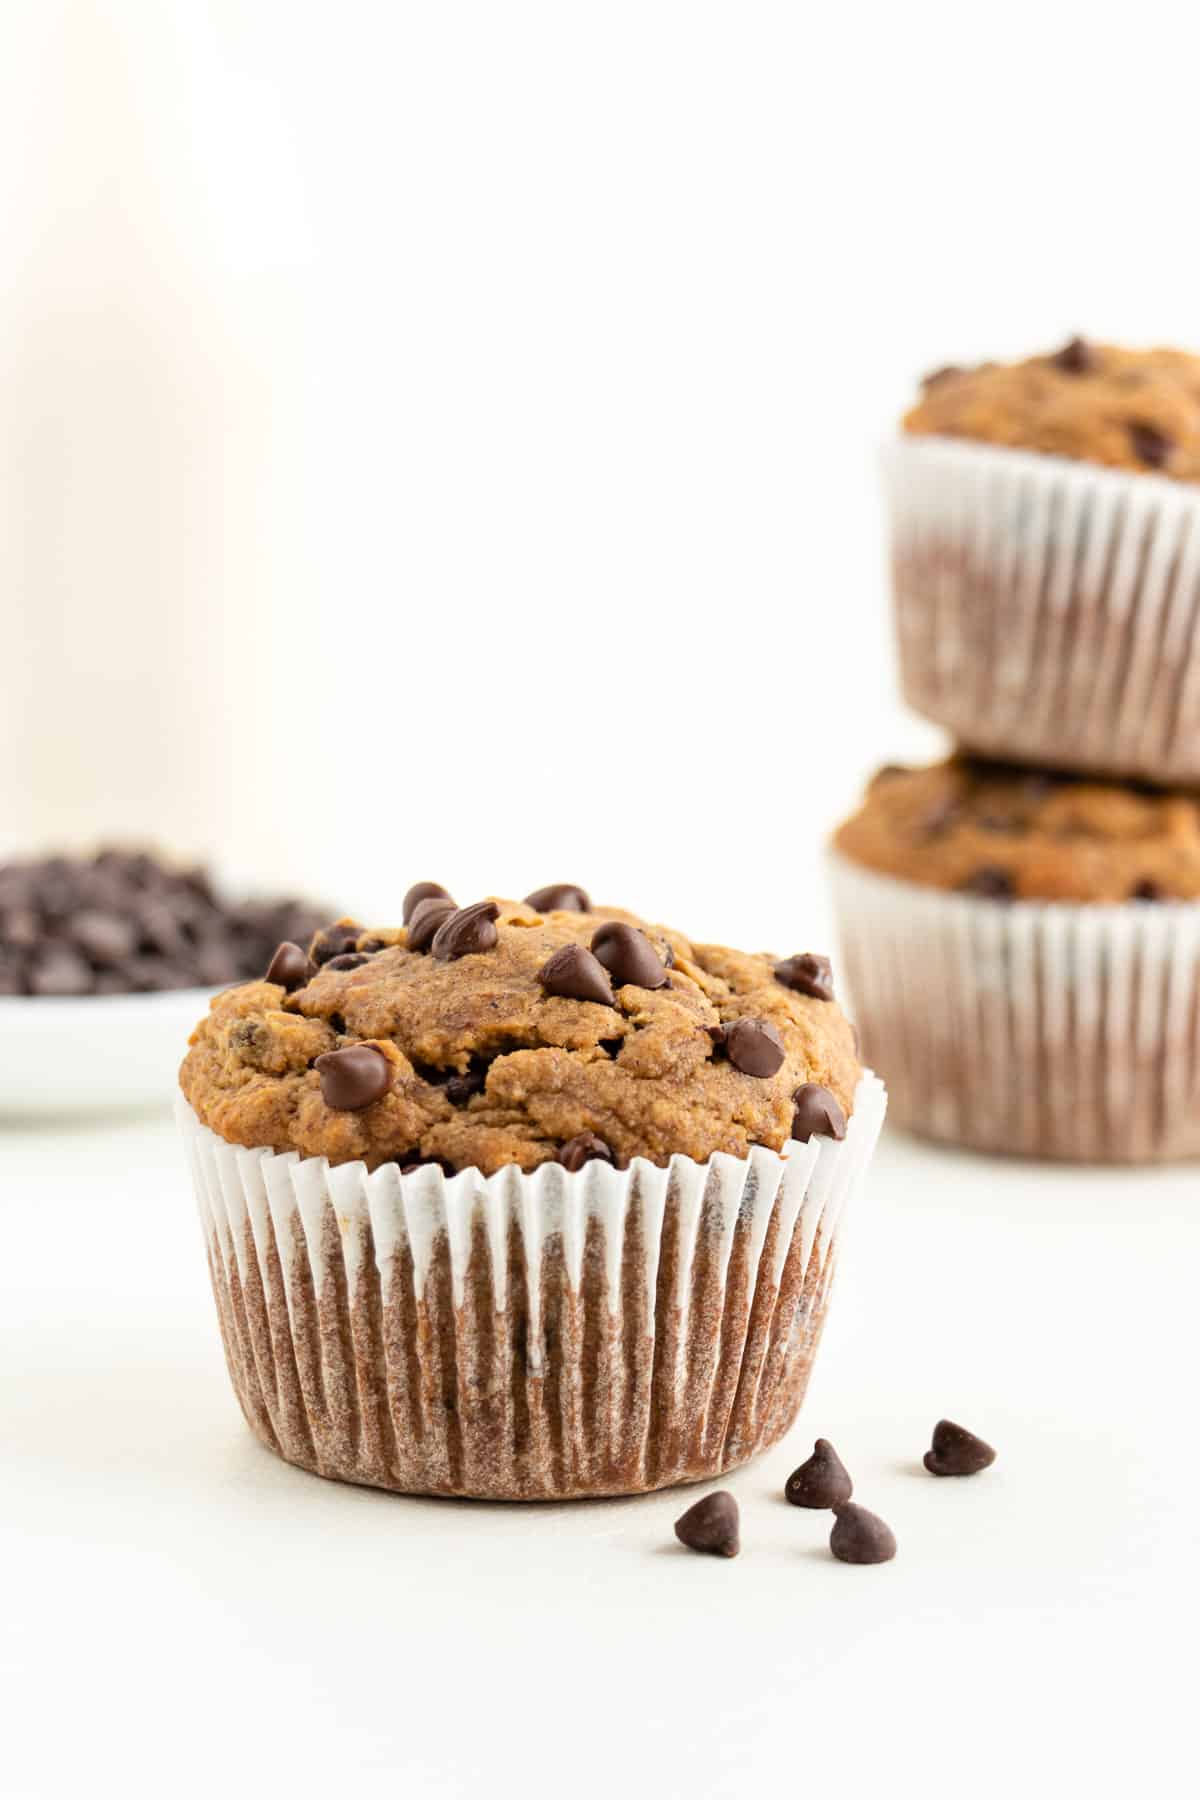 a gluten-free vegan chocolate chip muffin in front of a glass of almond milk and bowl of chocolate chips